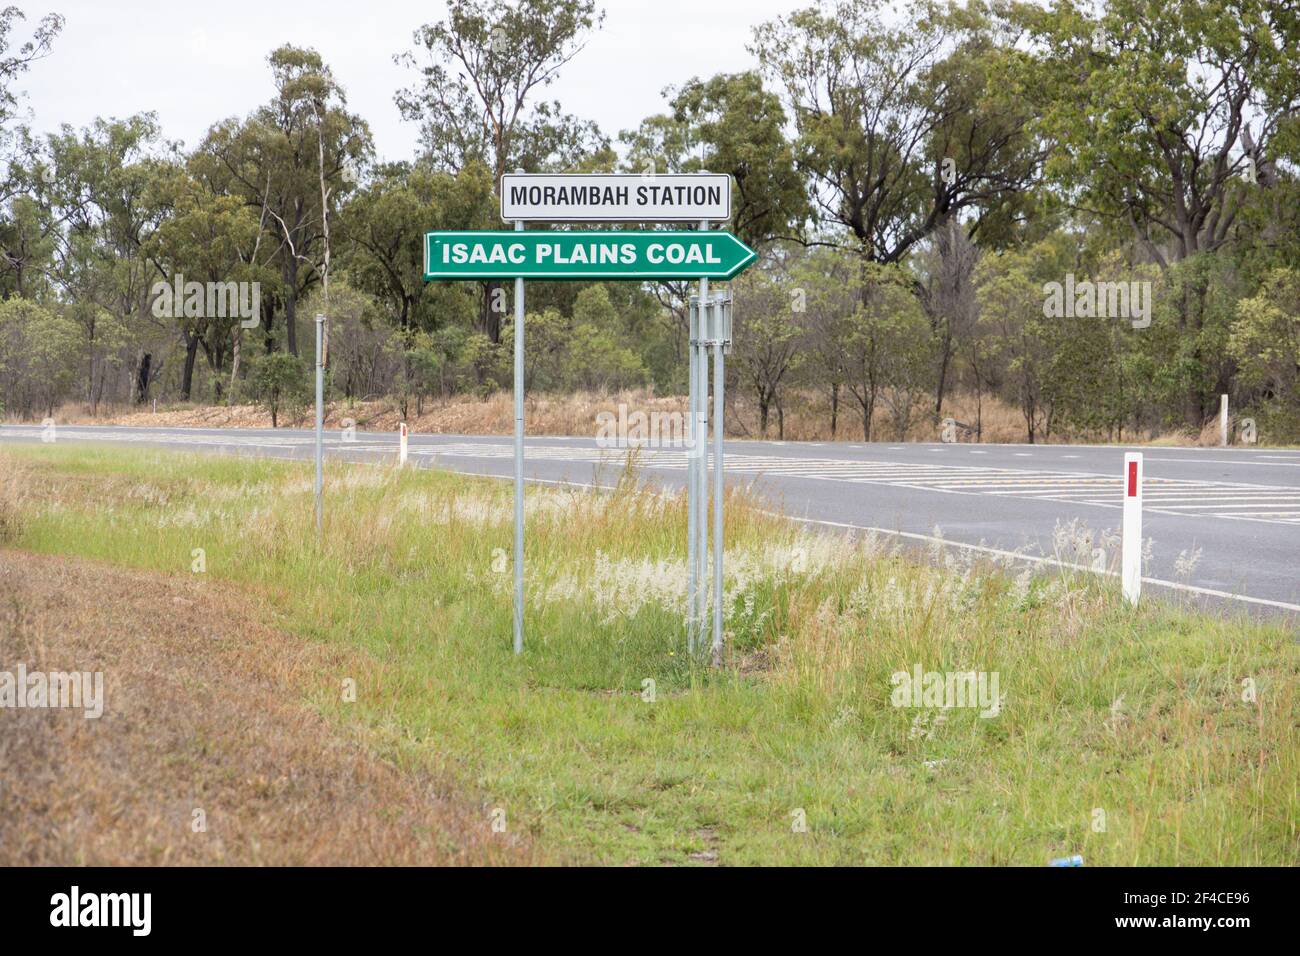 Direction signpost for the Isaac Plains coal mines in the Bowen Basin in Central Queensland on the highway between Mackay and Moranbah. Stock Photo